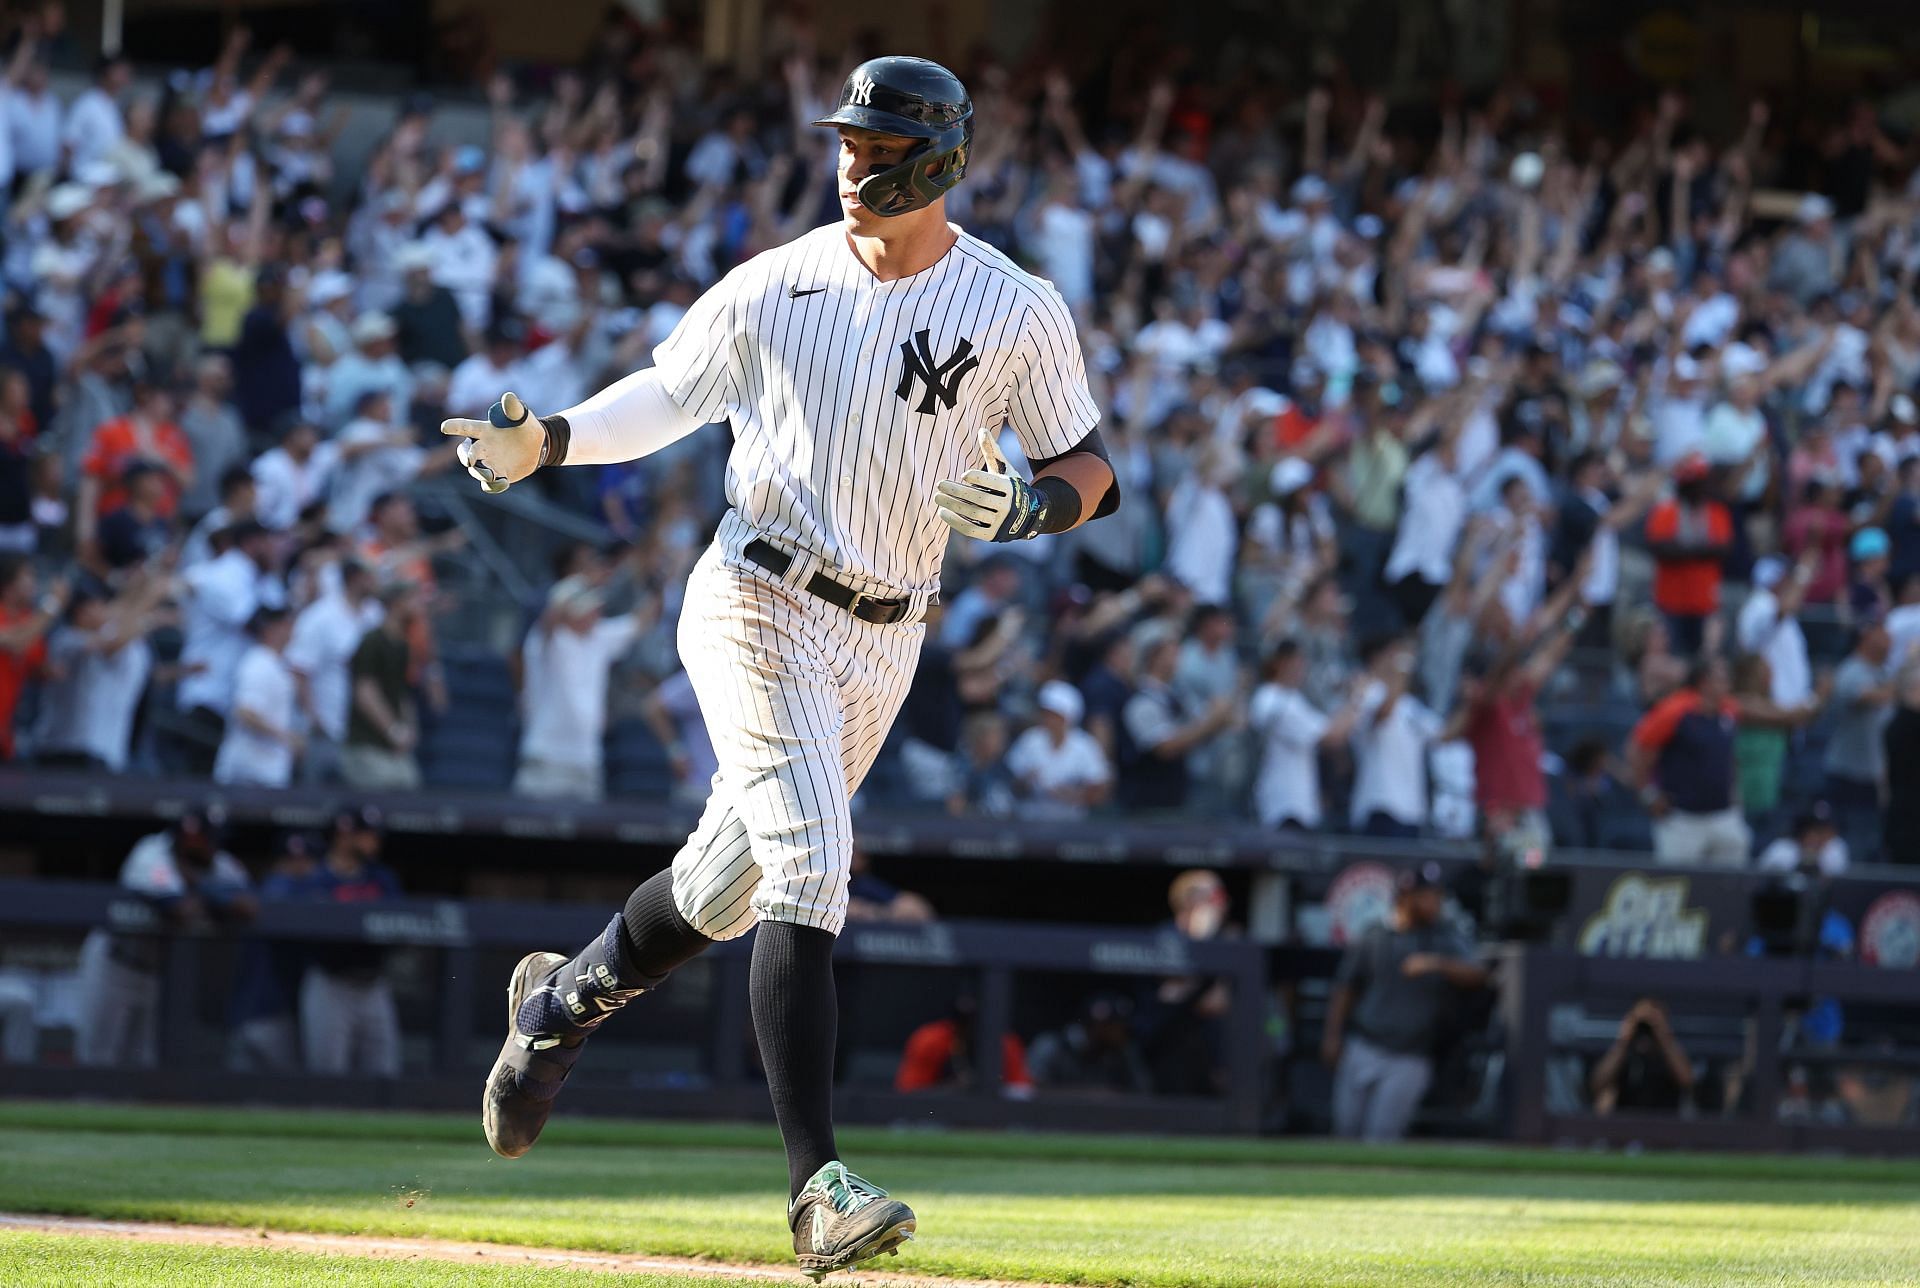 Aaron Judge of the New York Yankees hits a walk-off tenth inning